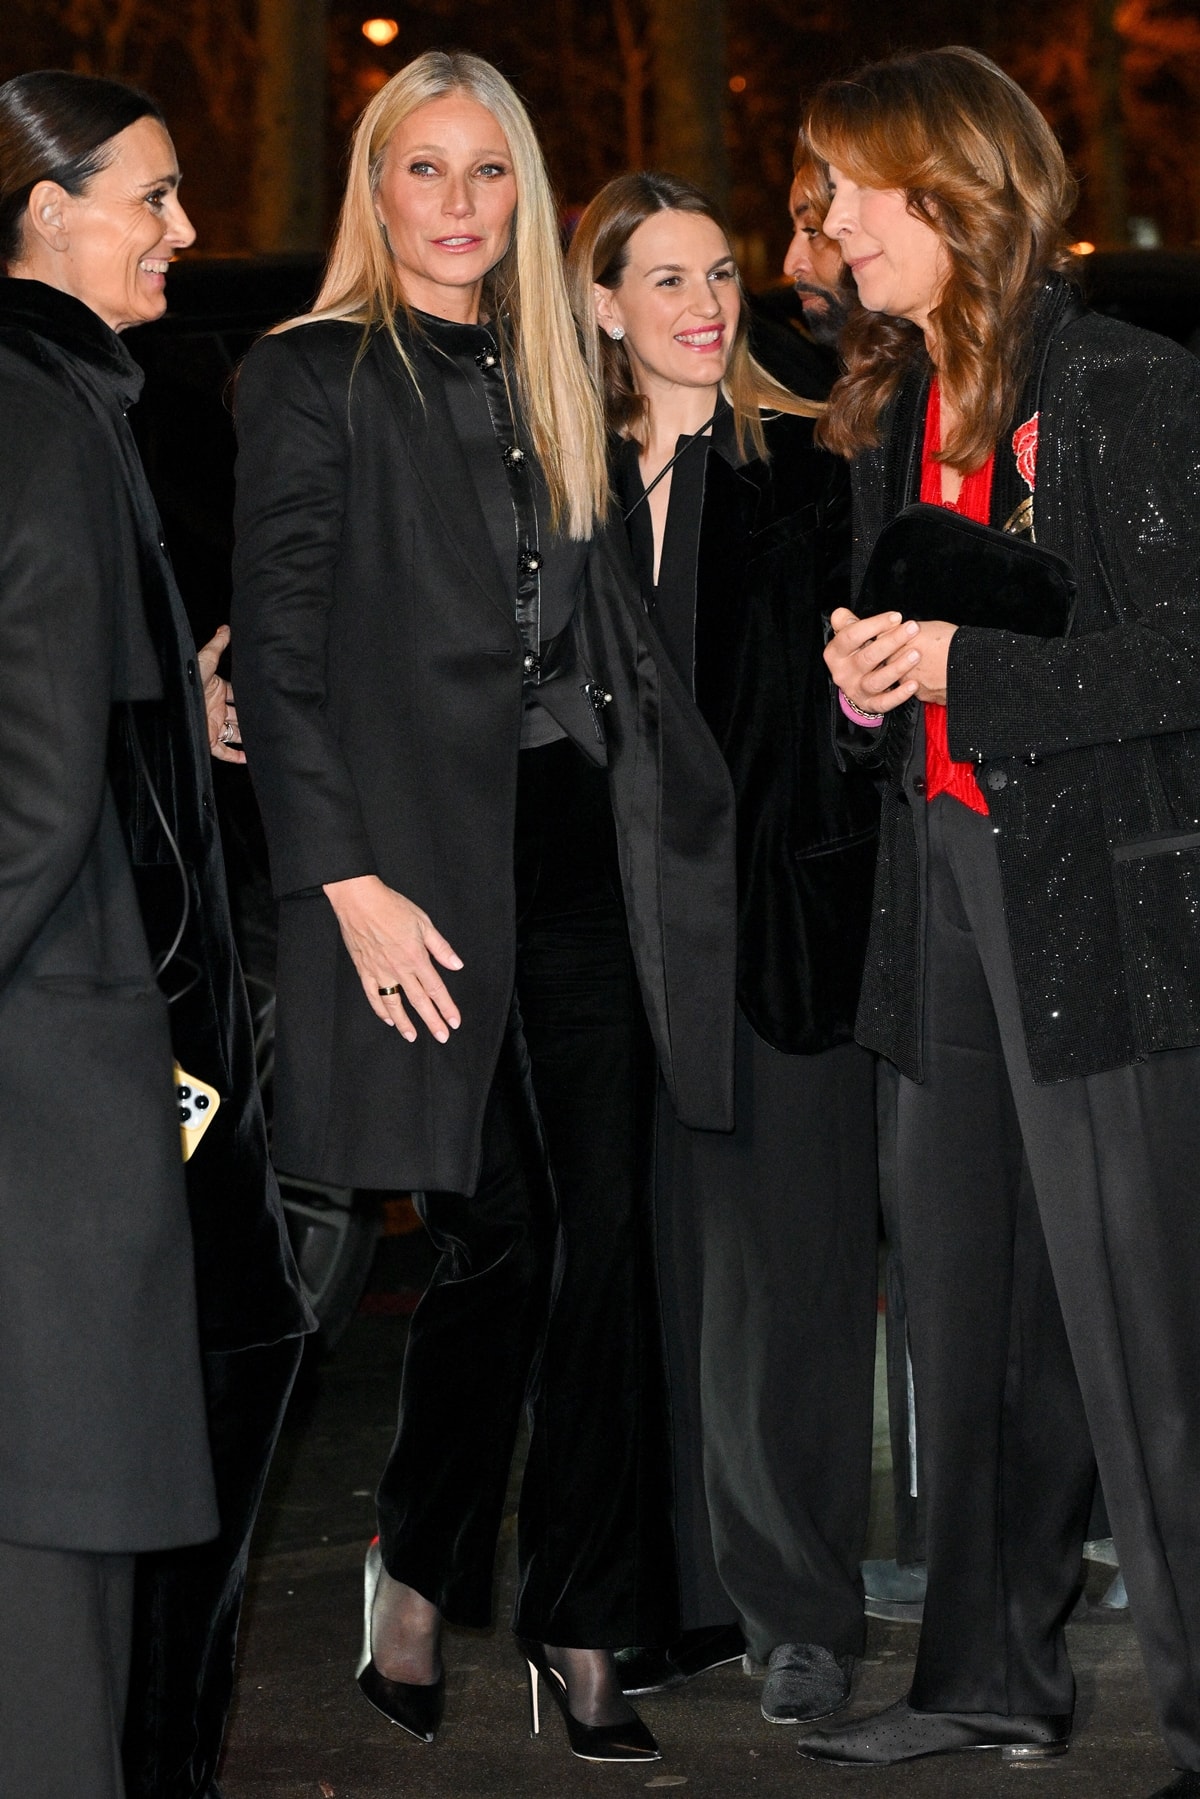 Gwyneth Paltrow's chic all-black ensemble, blending Armani's elegance with a hint of Matrix-style, includes a fitted top with pearl buttons and straight-leg trousers, complemented by a sleek black overcoat and pointed-toe stilettos